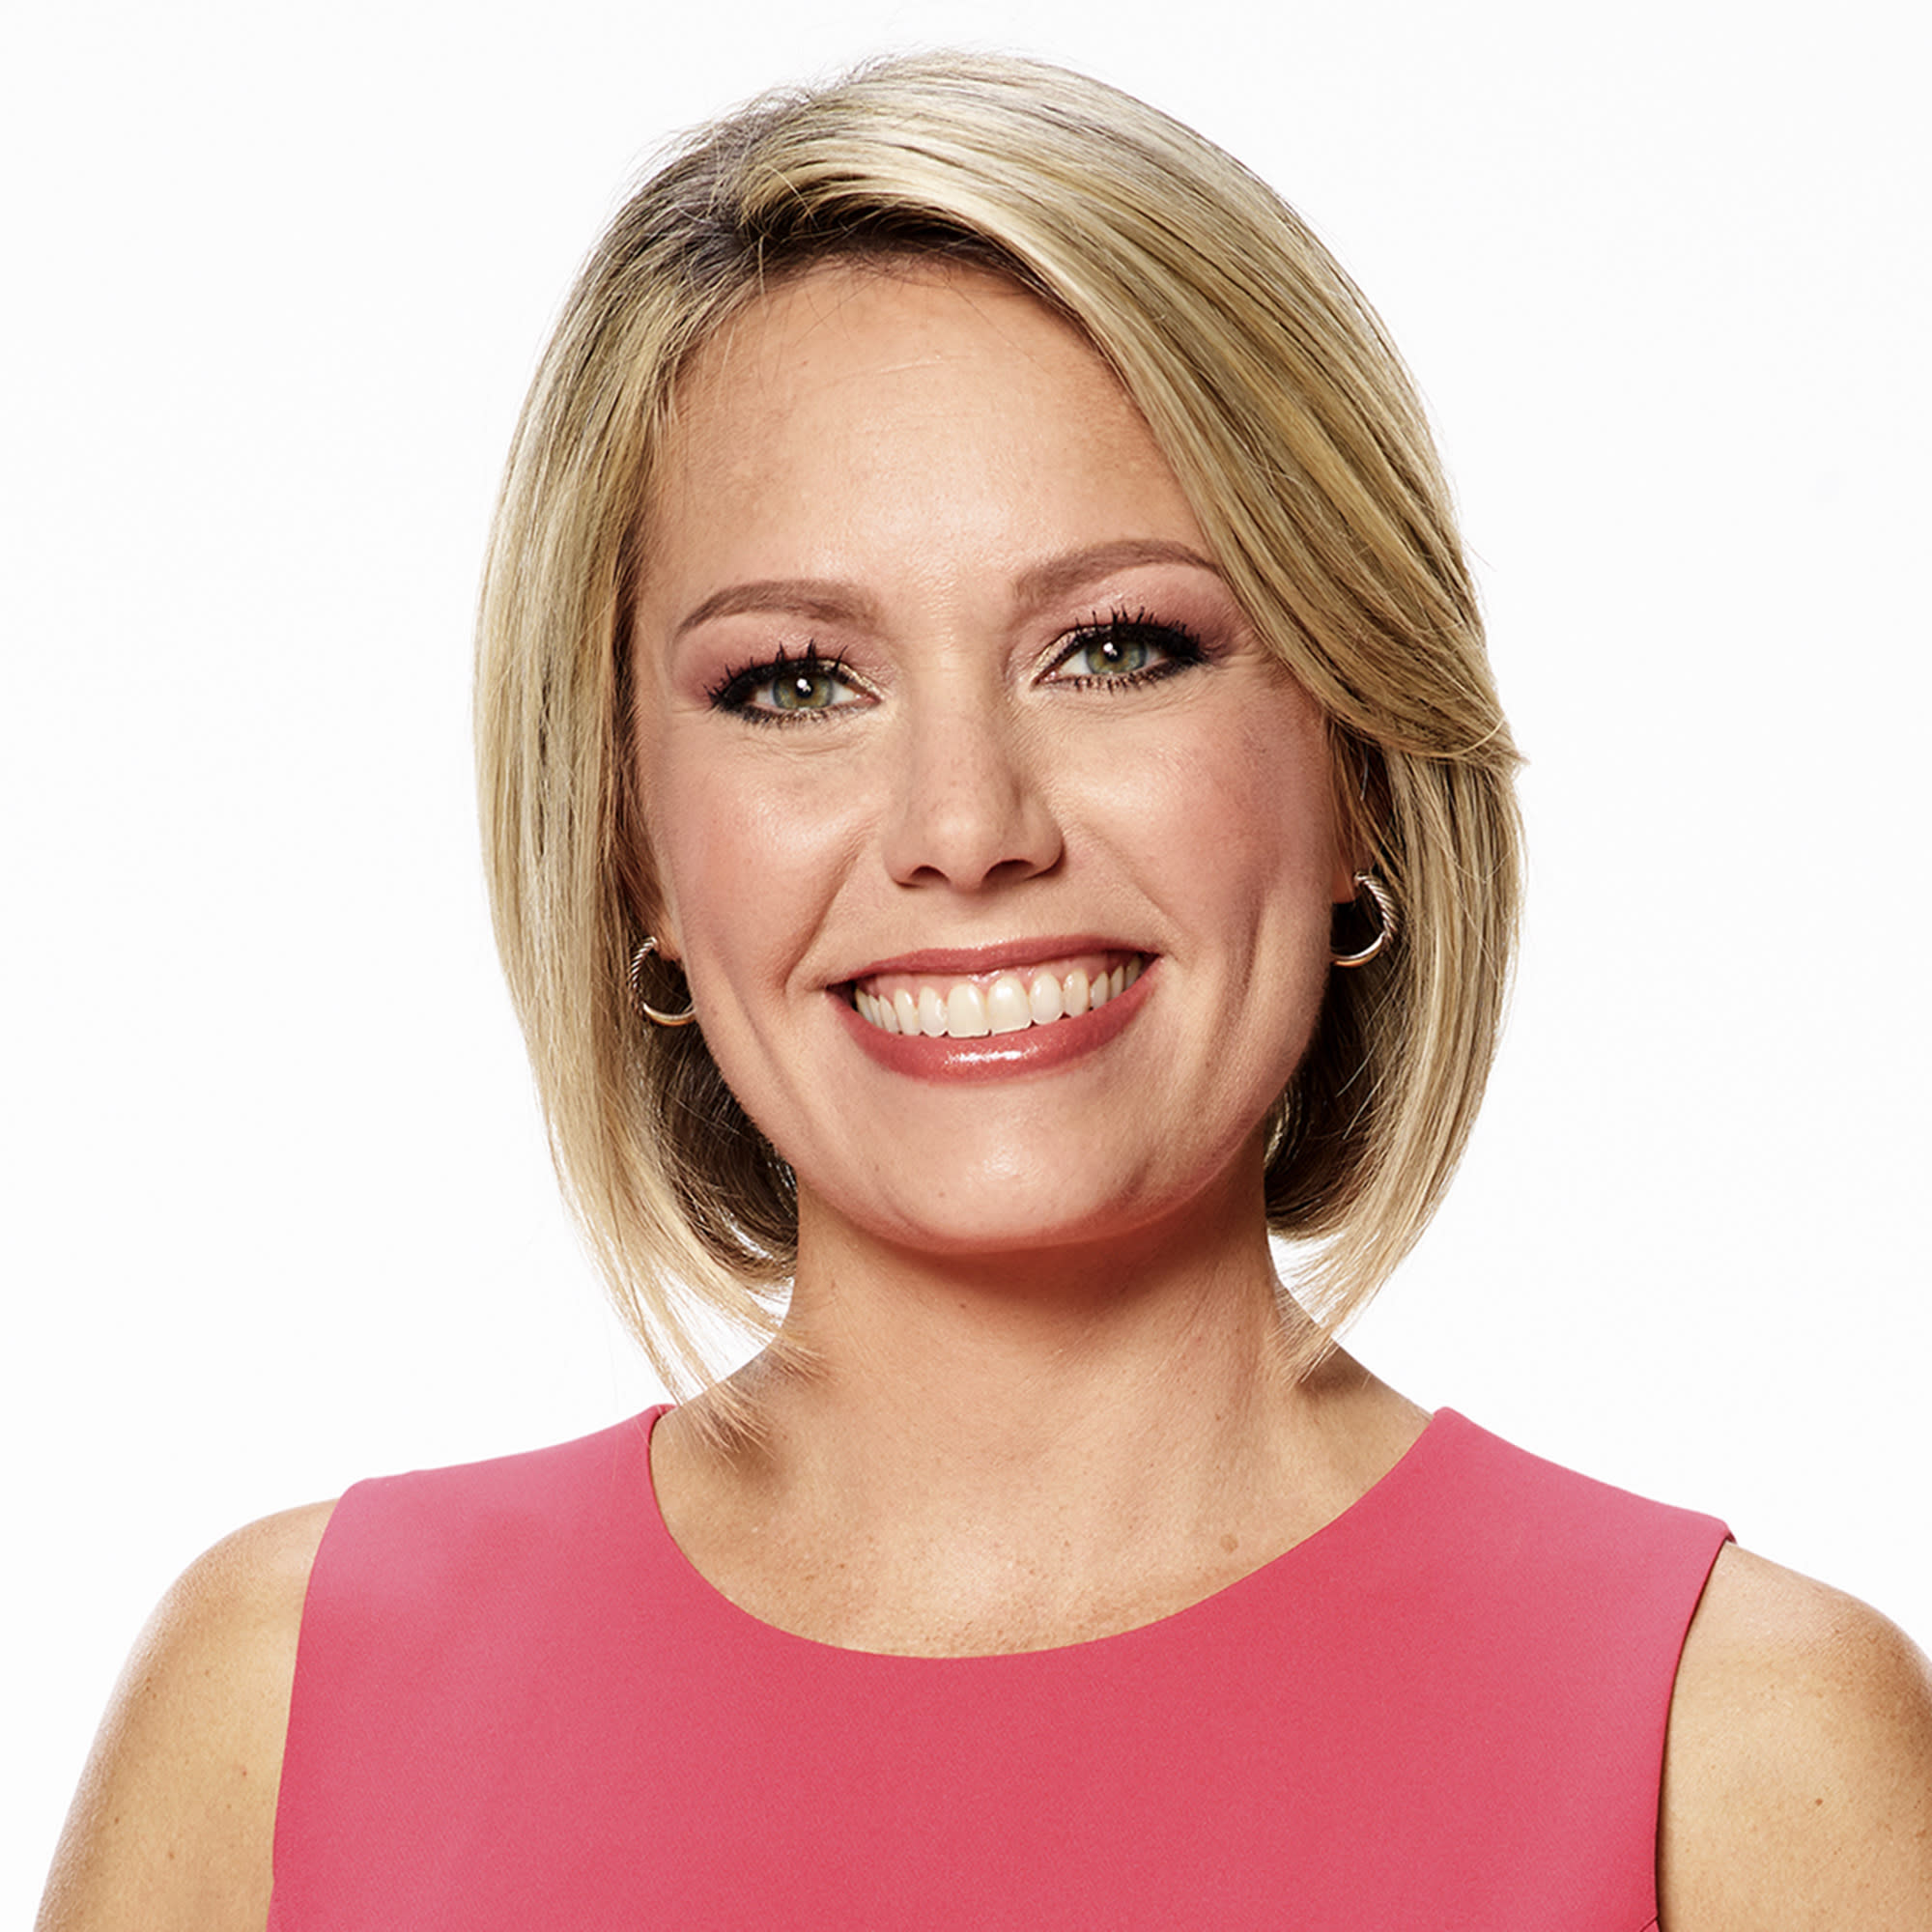 Dylan Dreyer Weather Anchor For Weekend Today Co Host Of 3rd Hour Of ...